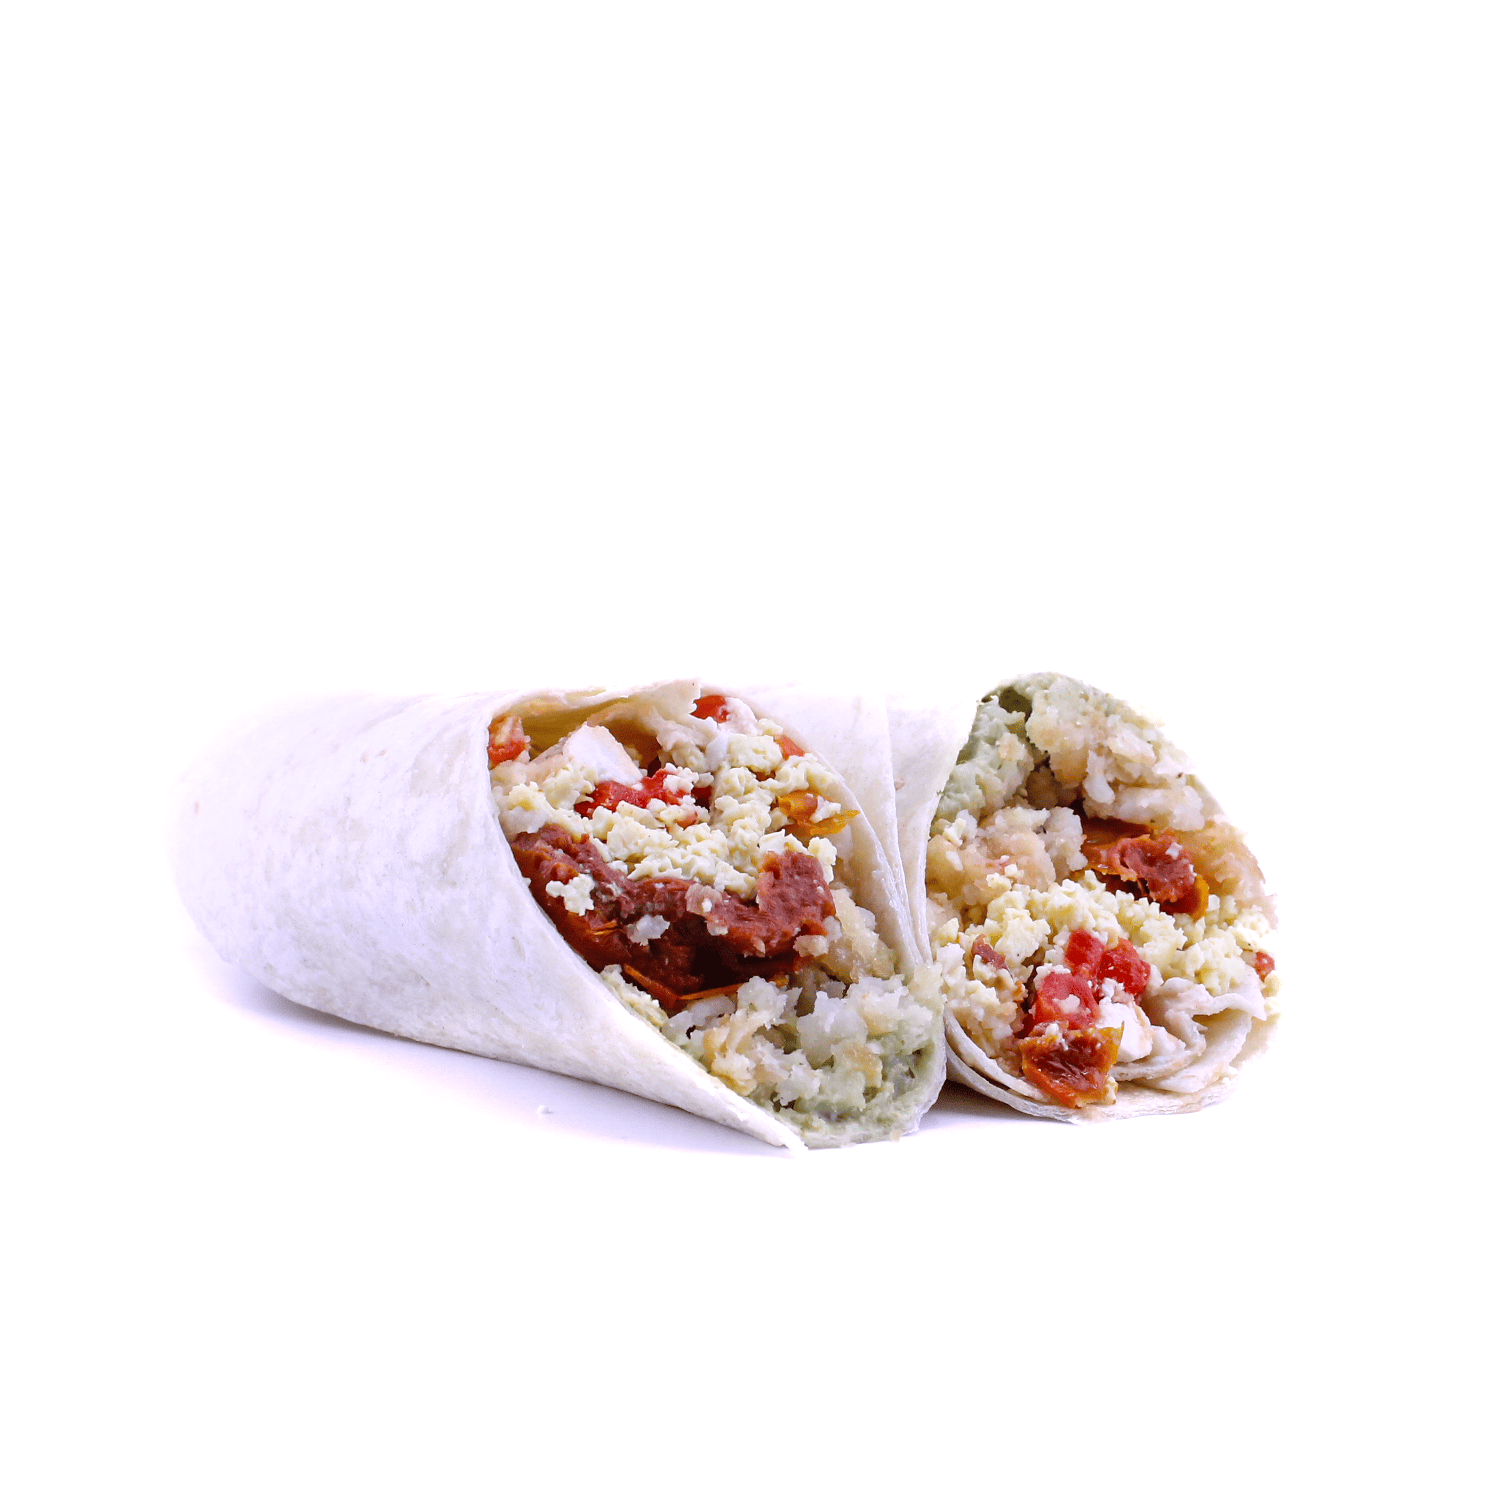 Rise & Shine (Hot Wrap) - Scrambled egg, green goodness aioli, crispy potato hash, roasted red peppers, feta cheese, roasted tomatoes, wrapped in a flour tortilla - Vegetarian